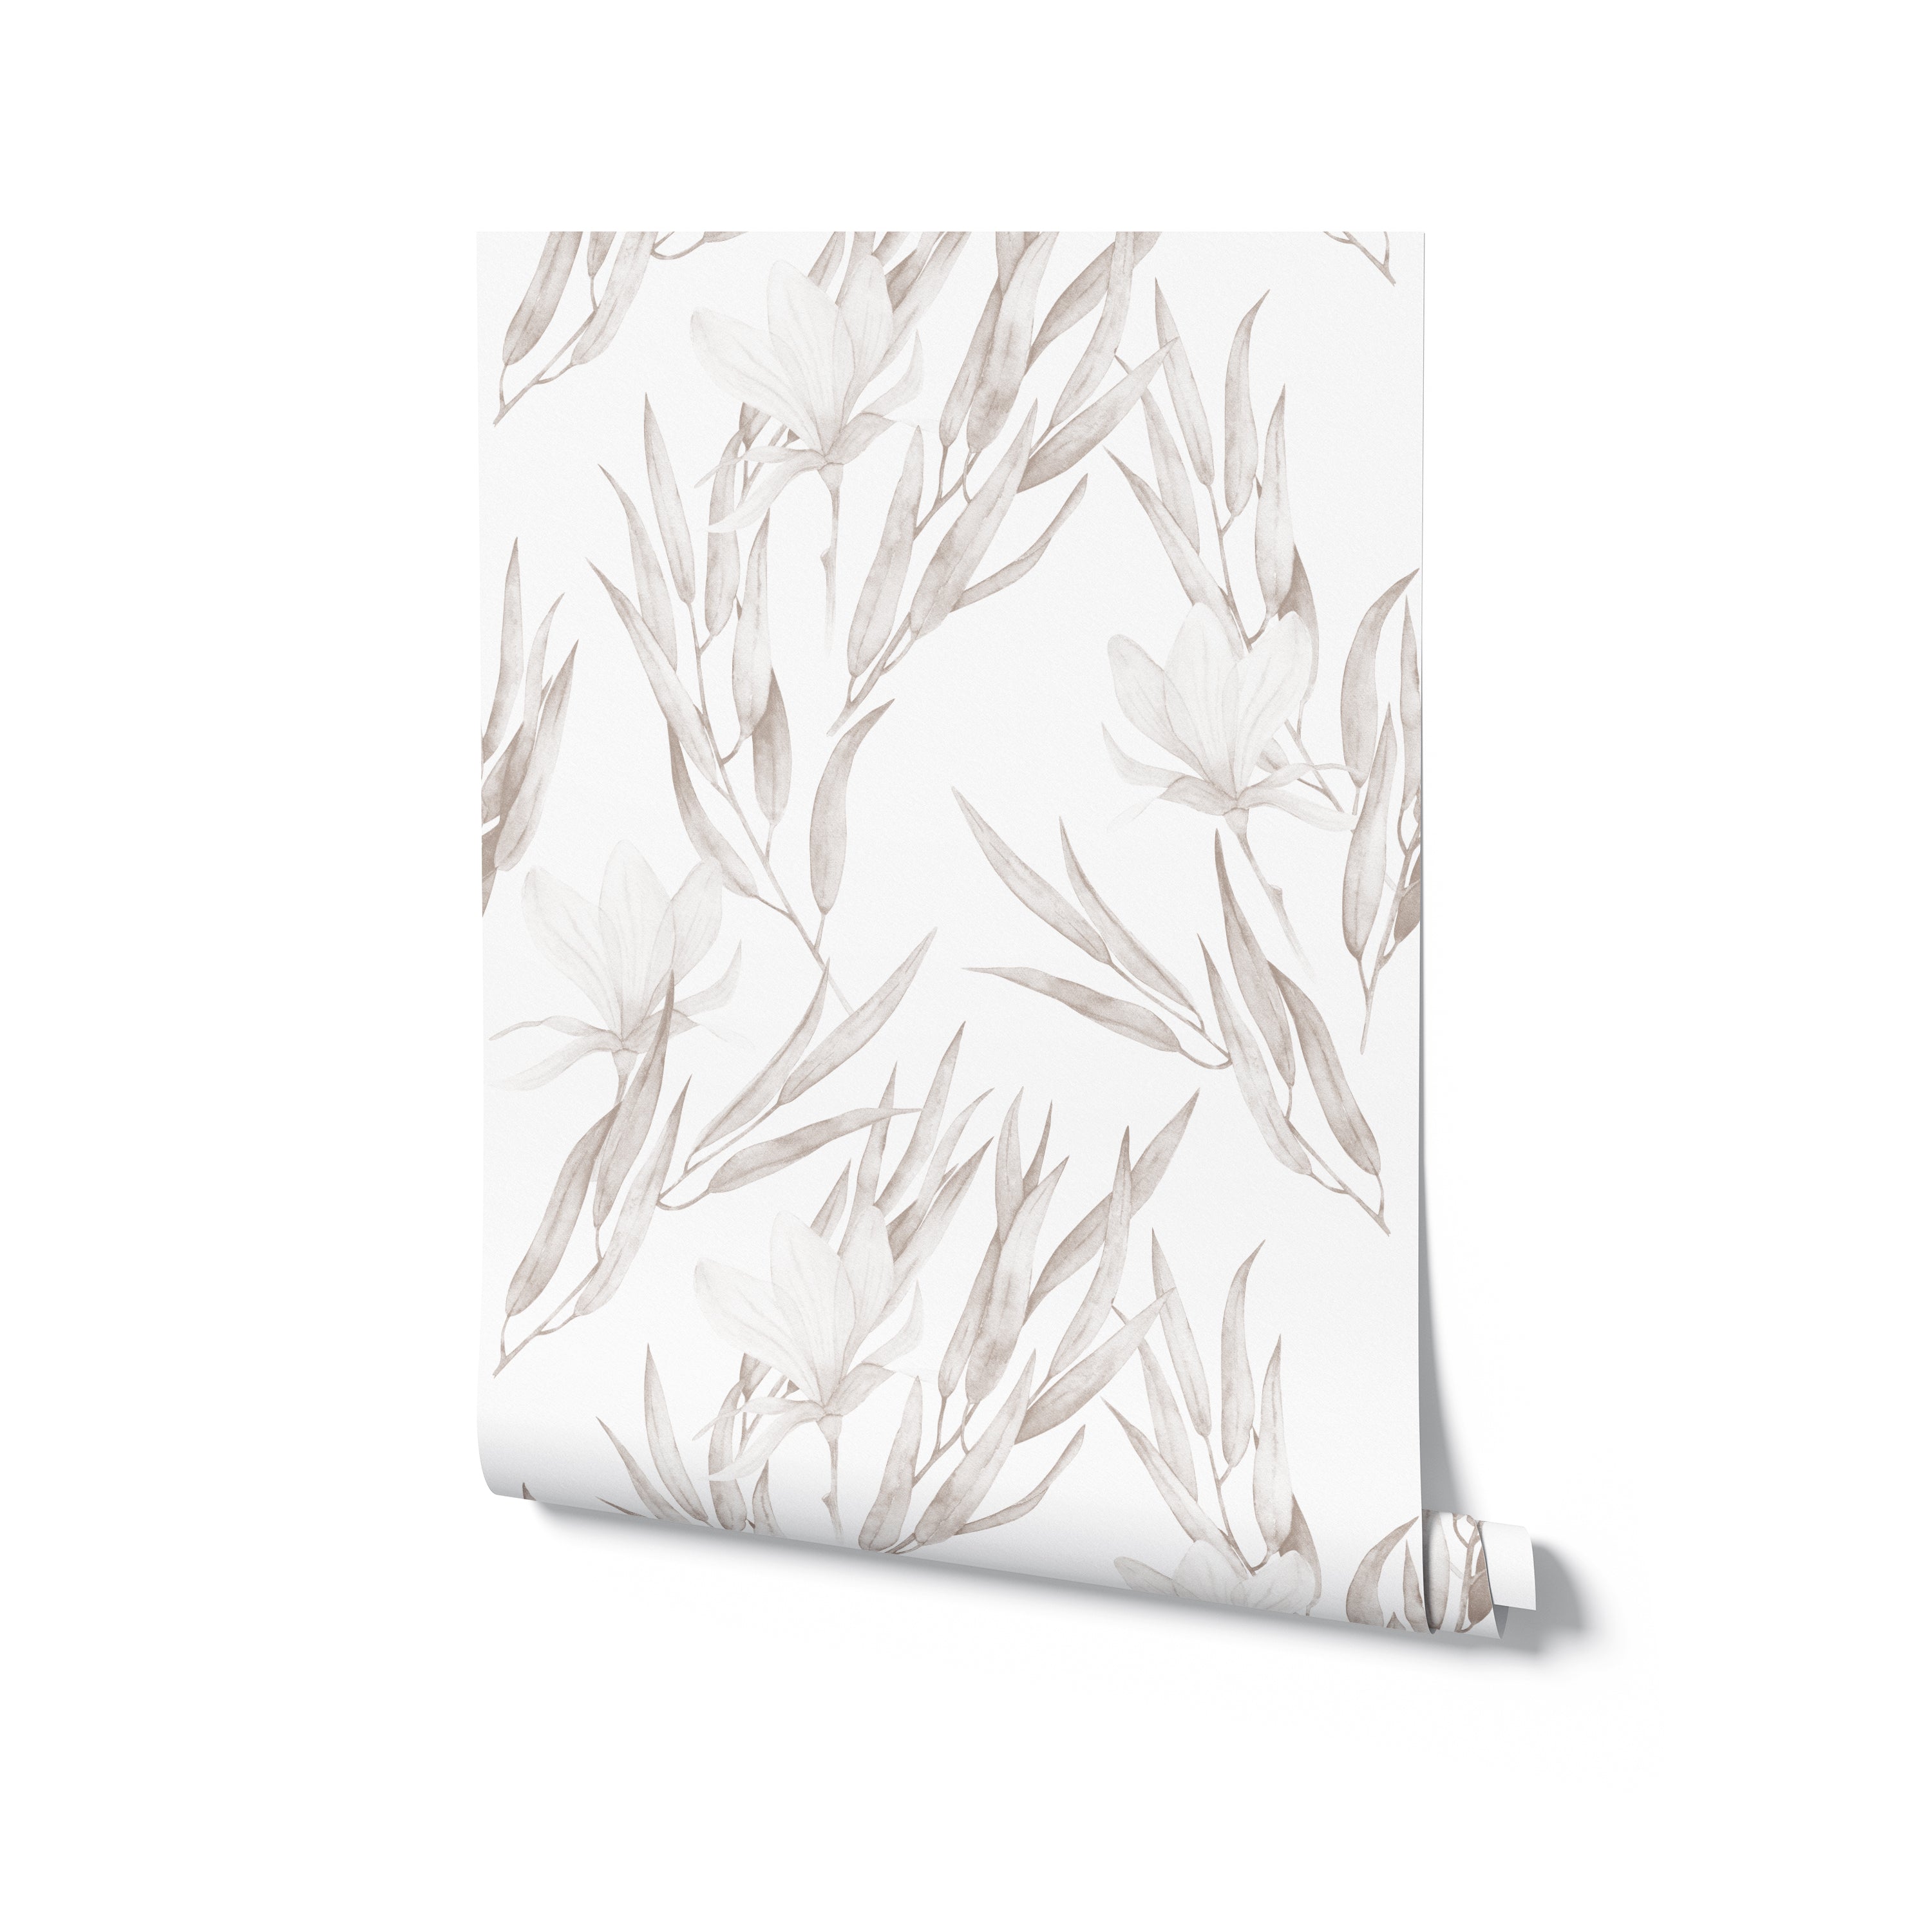 An image of a roll of wallpaper showcasing a gentle floral pattern with watercolor illustrations of beige flowers and leaves. The design is ideal for adding a soft and sophisticated touch to any room.